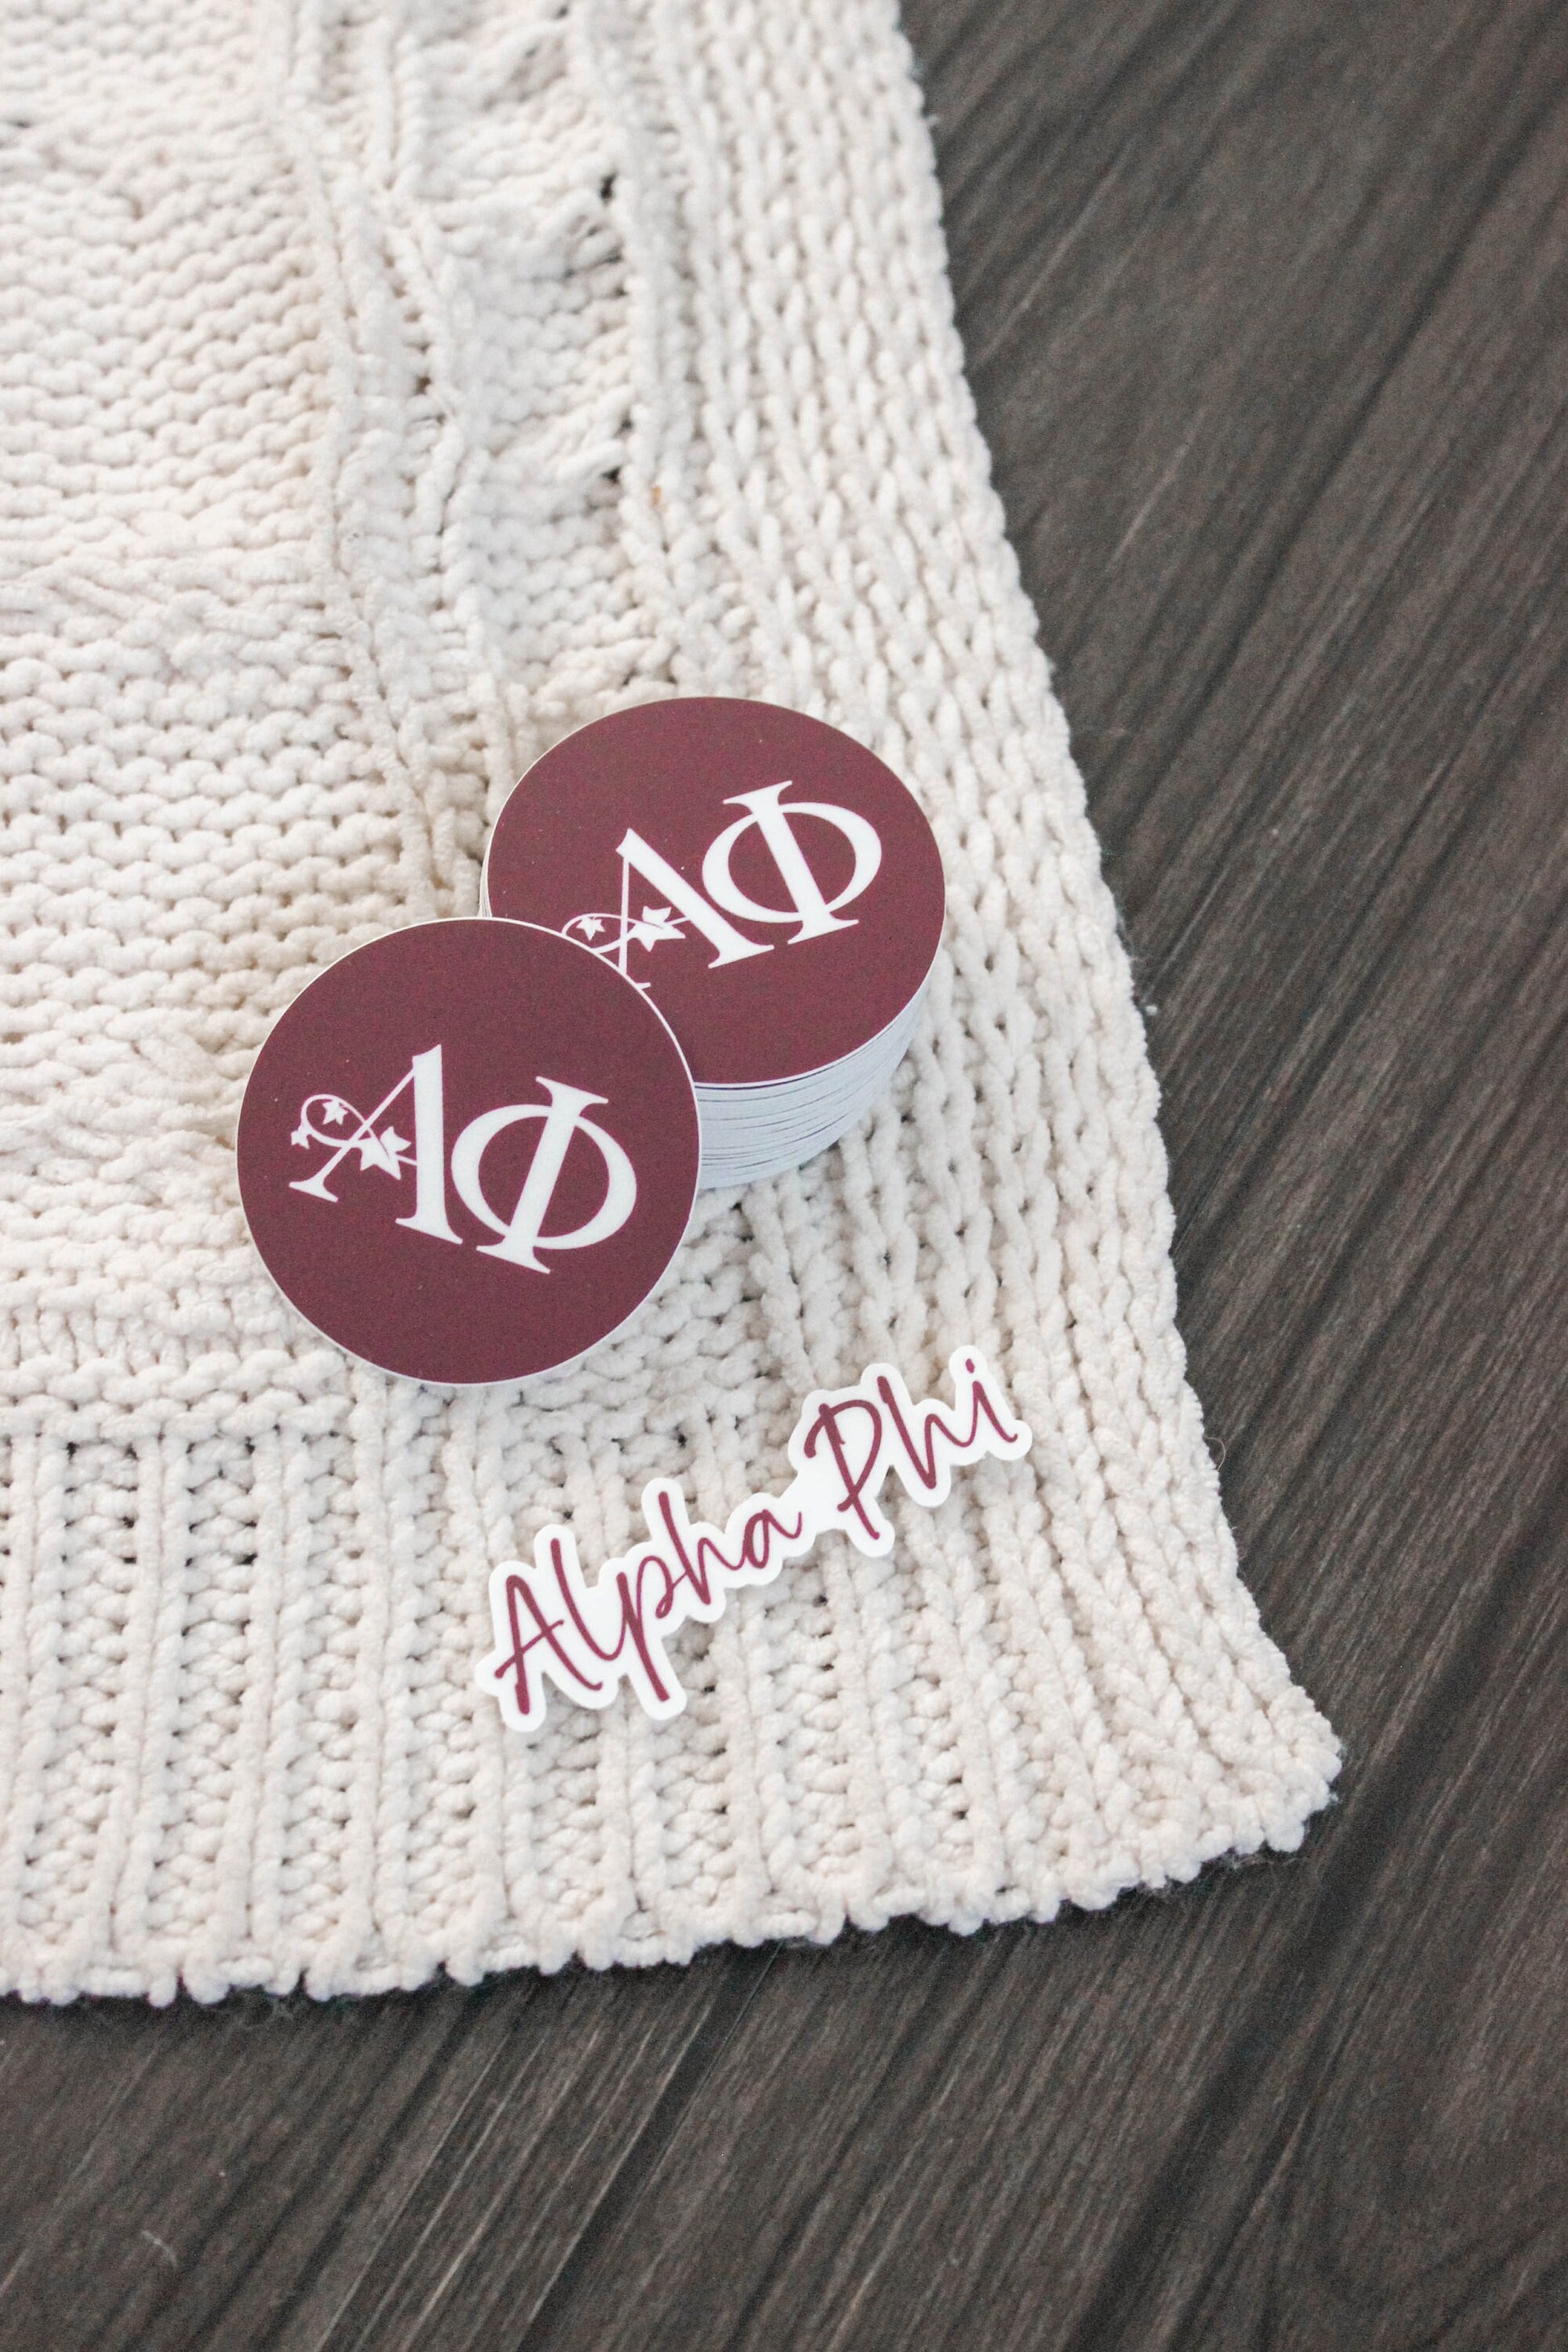 APhi Logo sticker and name 